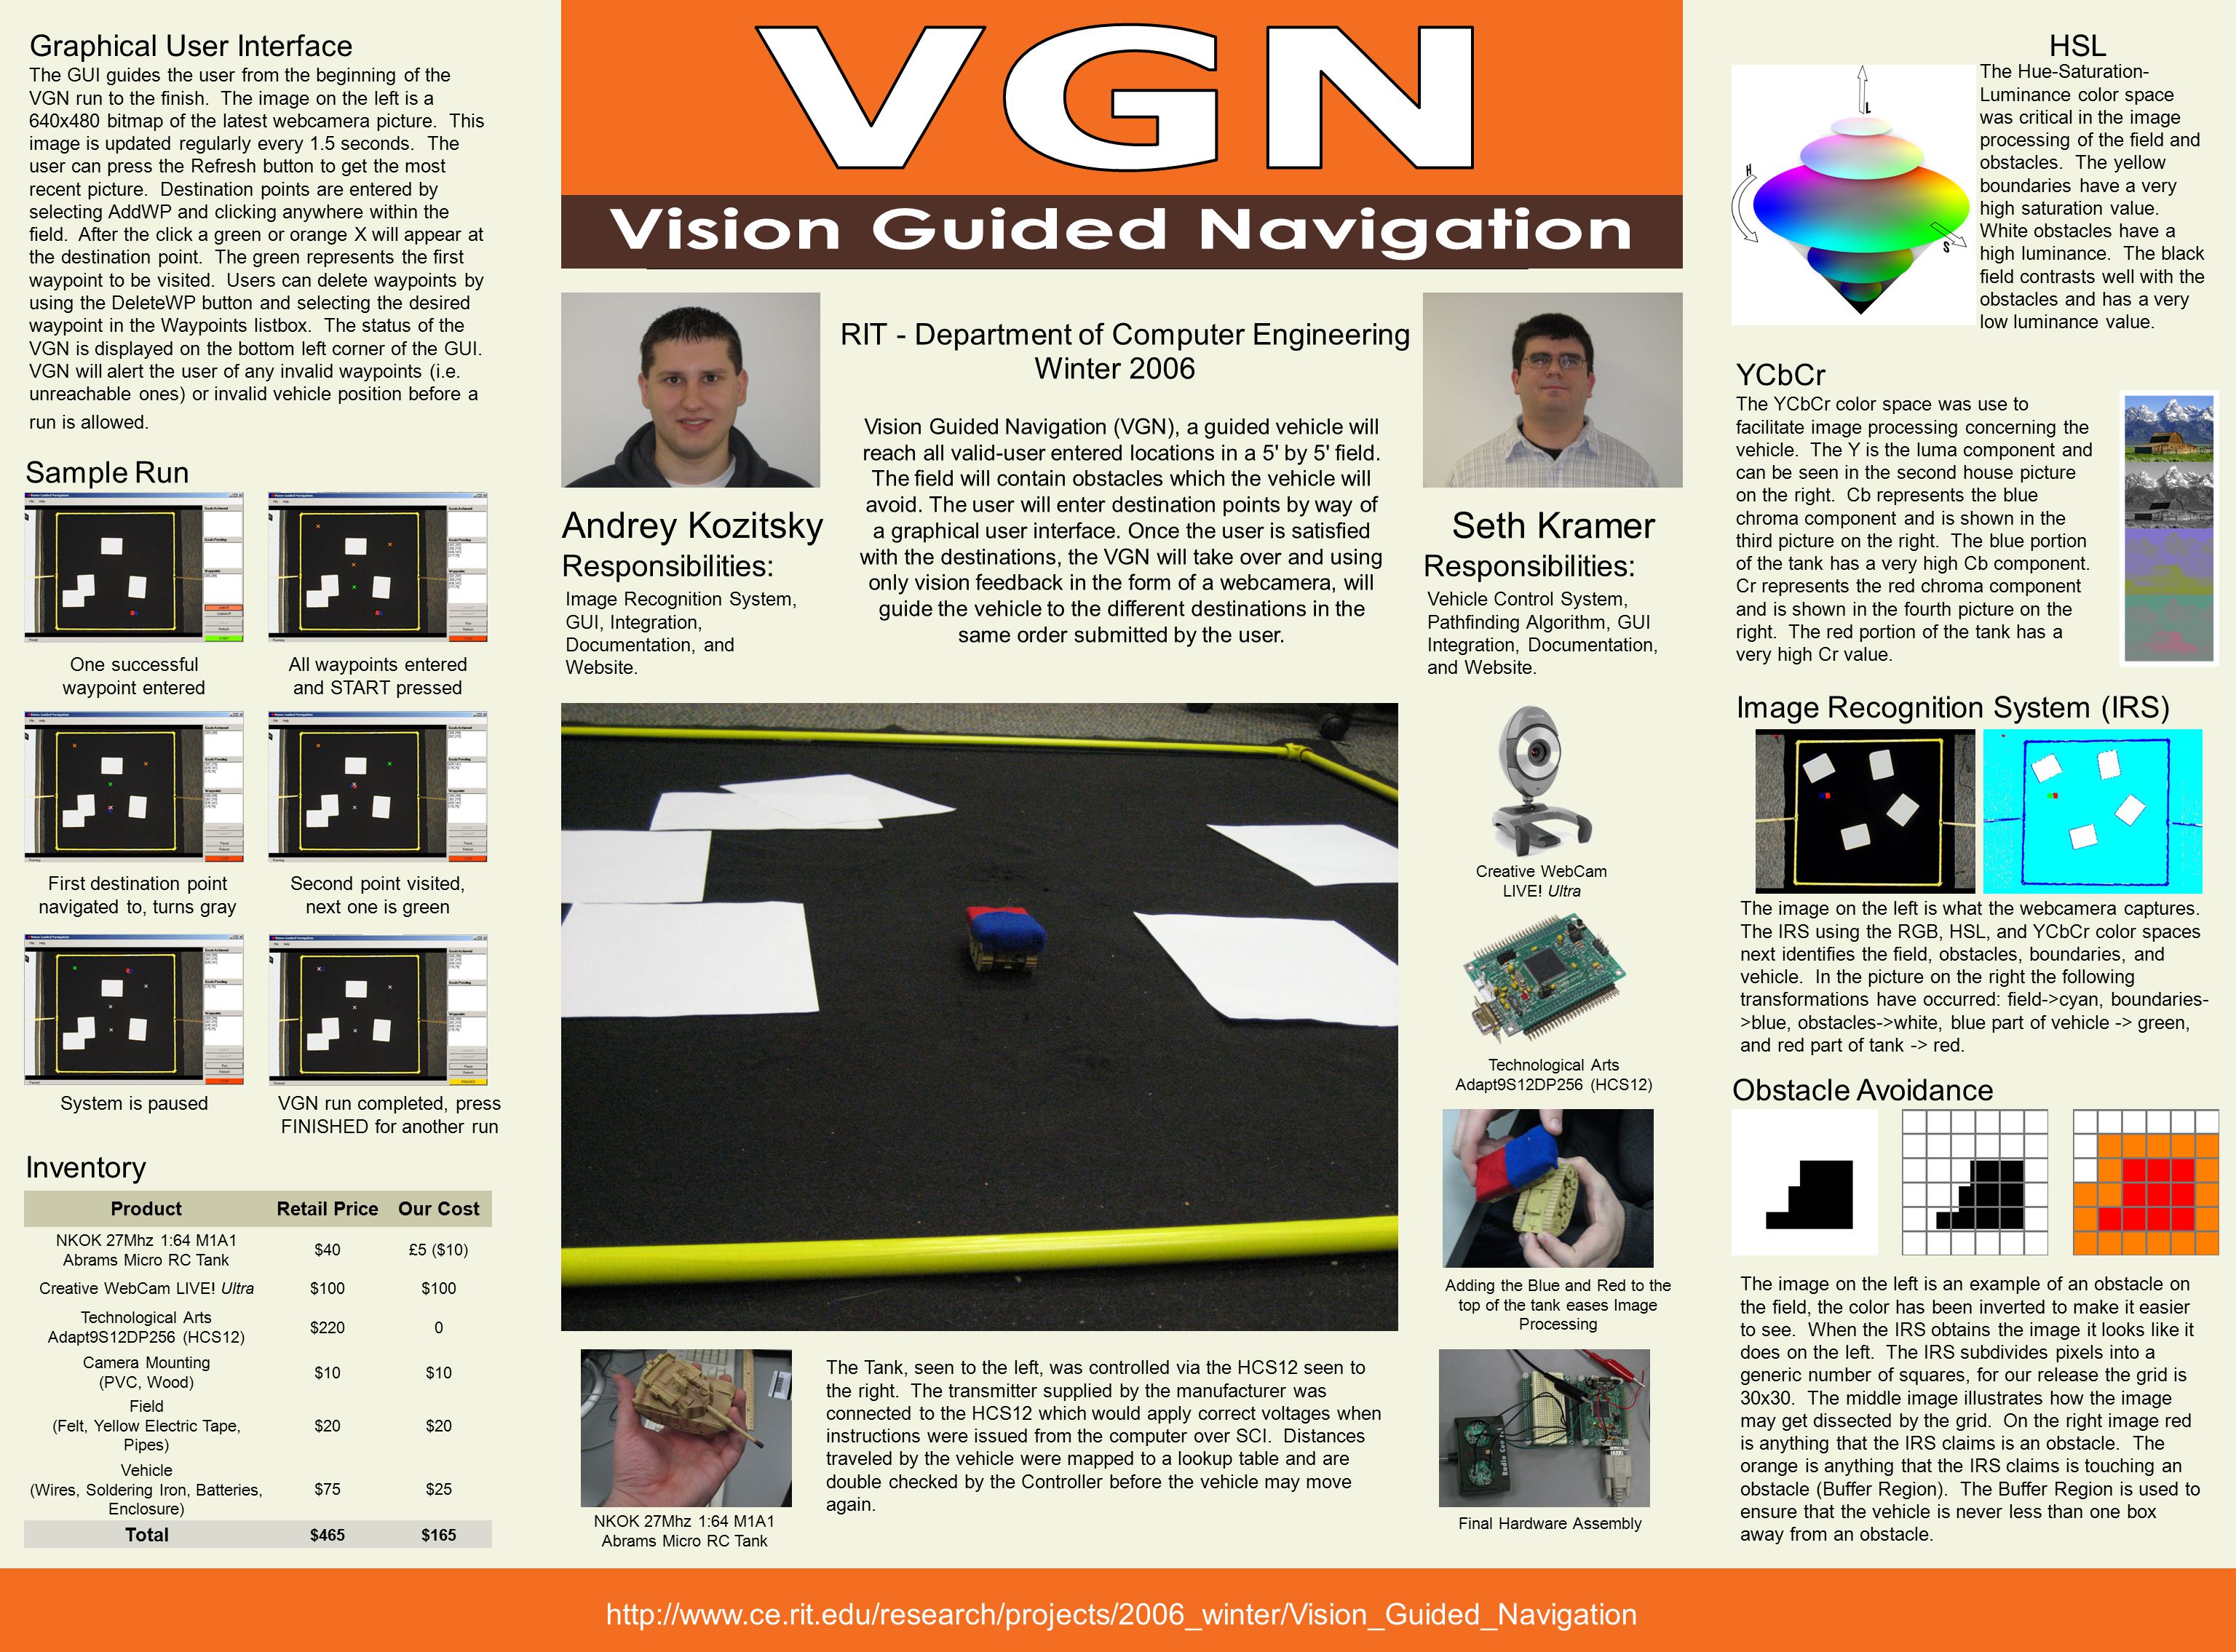 RIT - Department of Computer Engineering Winter 2006 Andrey Kozitsky Seth Kramer   Vision Guided Navigation (VGN), a guided vehicle will reach all valid-user entered locations in a 5 by 5 field.